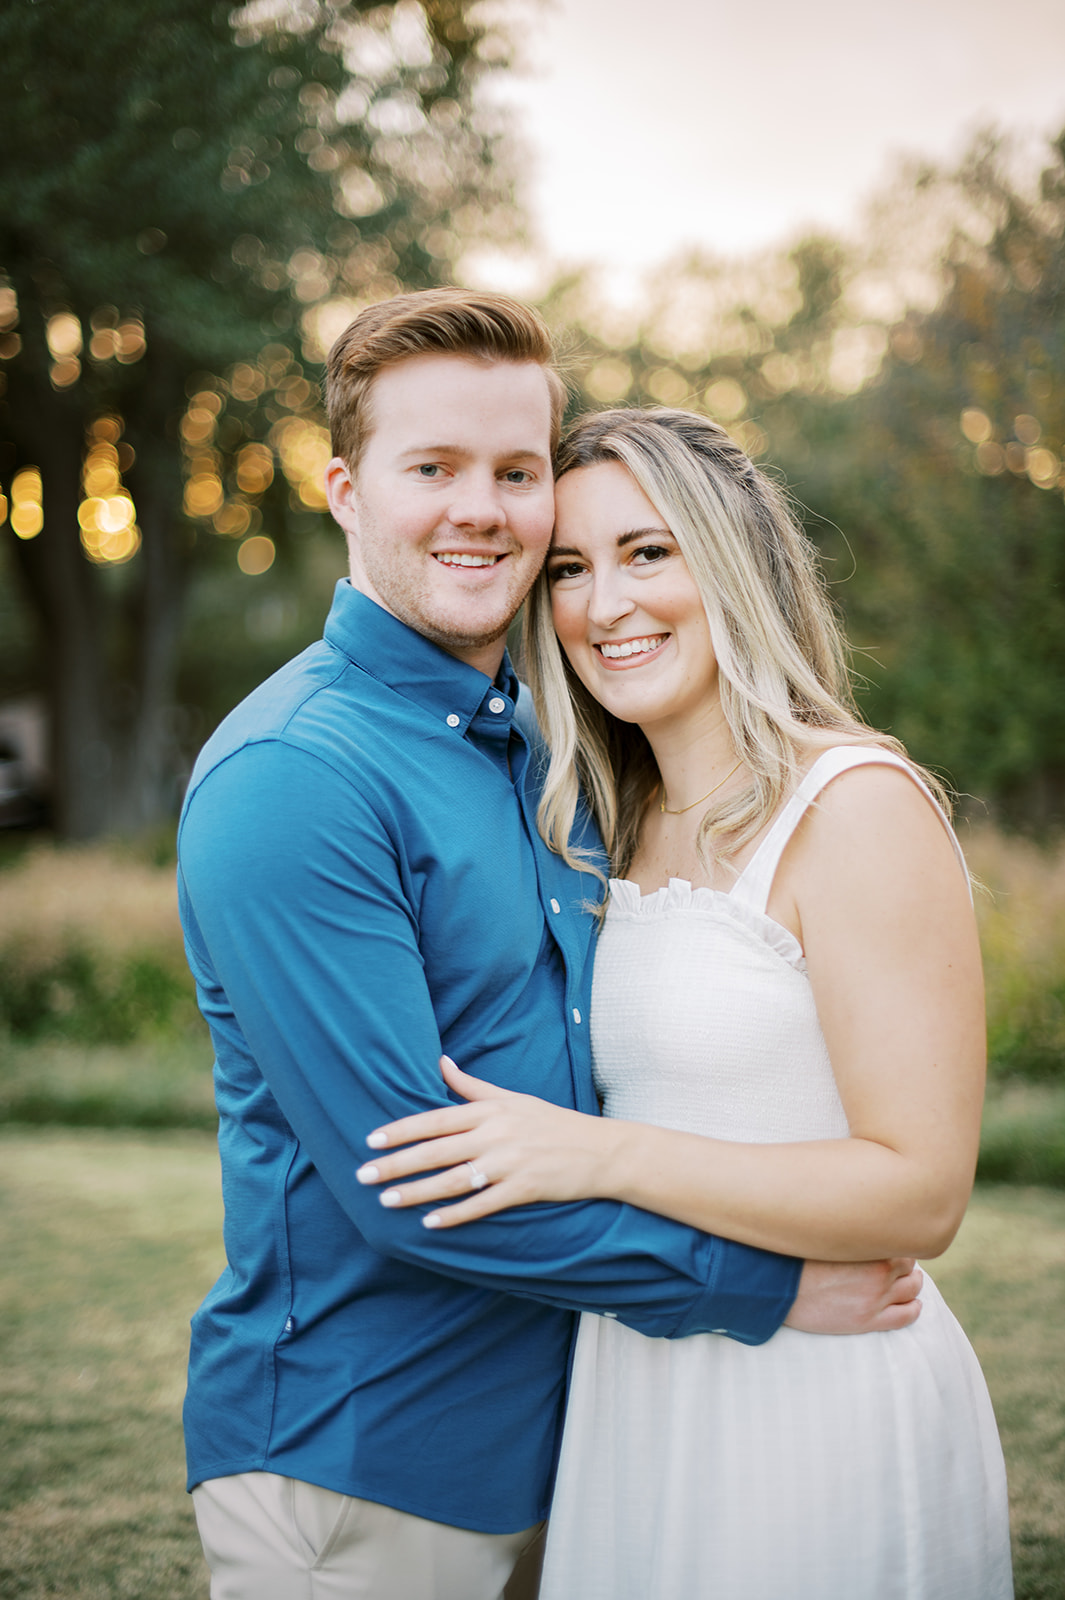 A Sweet Afternoon Engagement Session At Dallas Flippen Park Couple Embracing